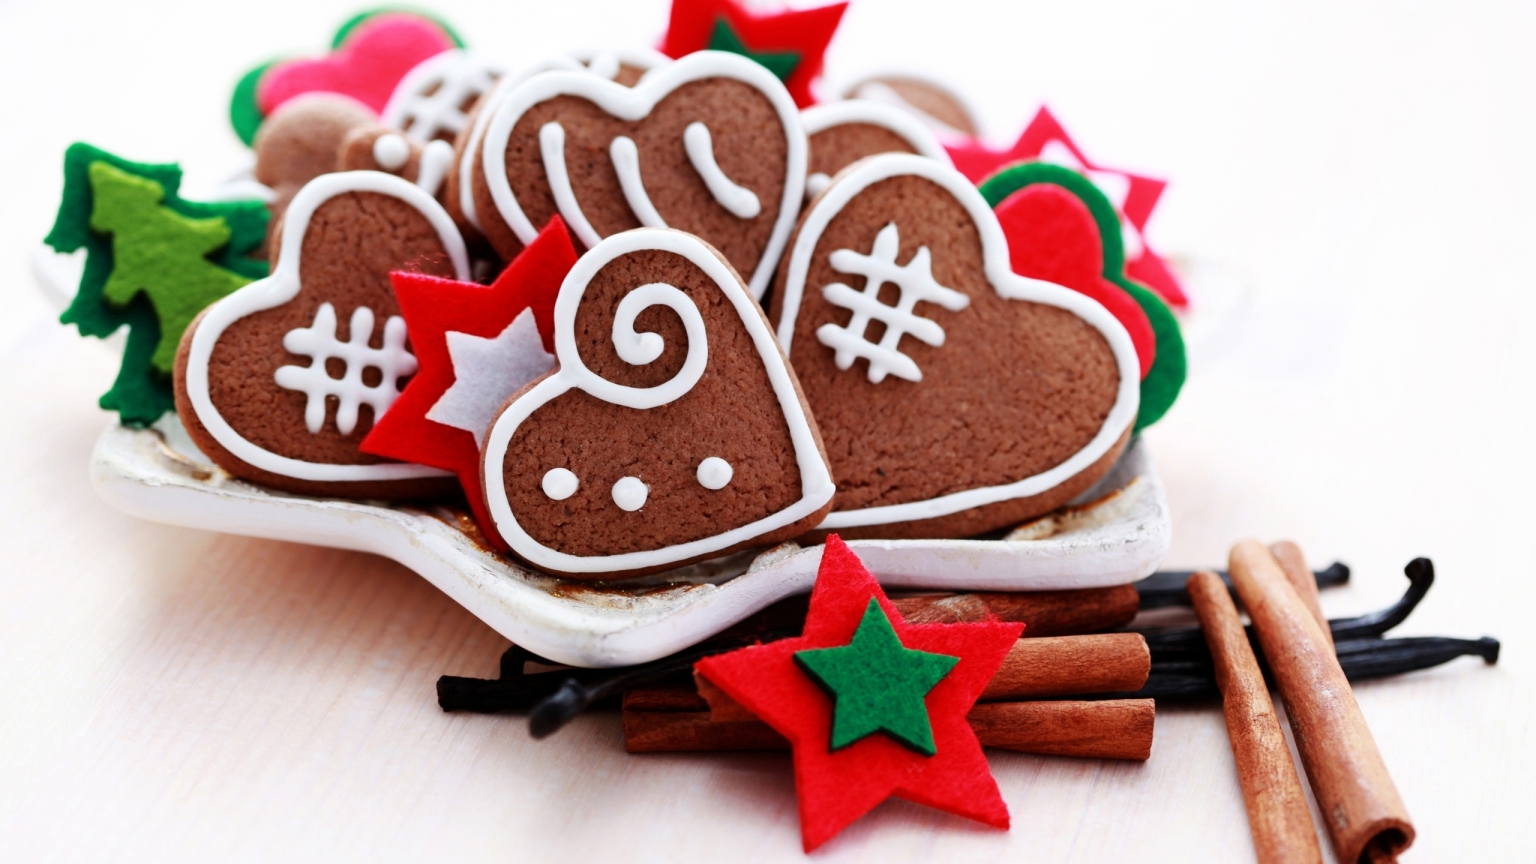 Christmas Sweets Ideas for 1536 x 864 HDTV resolution